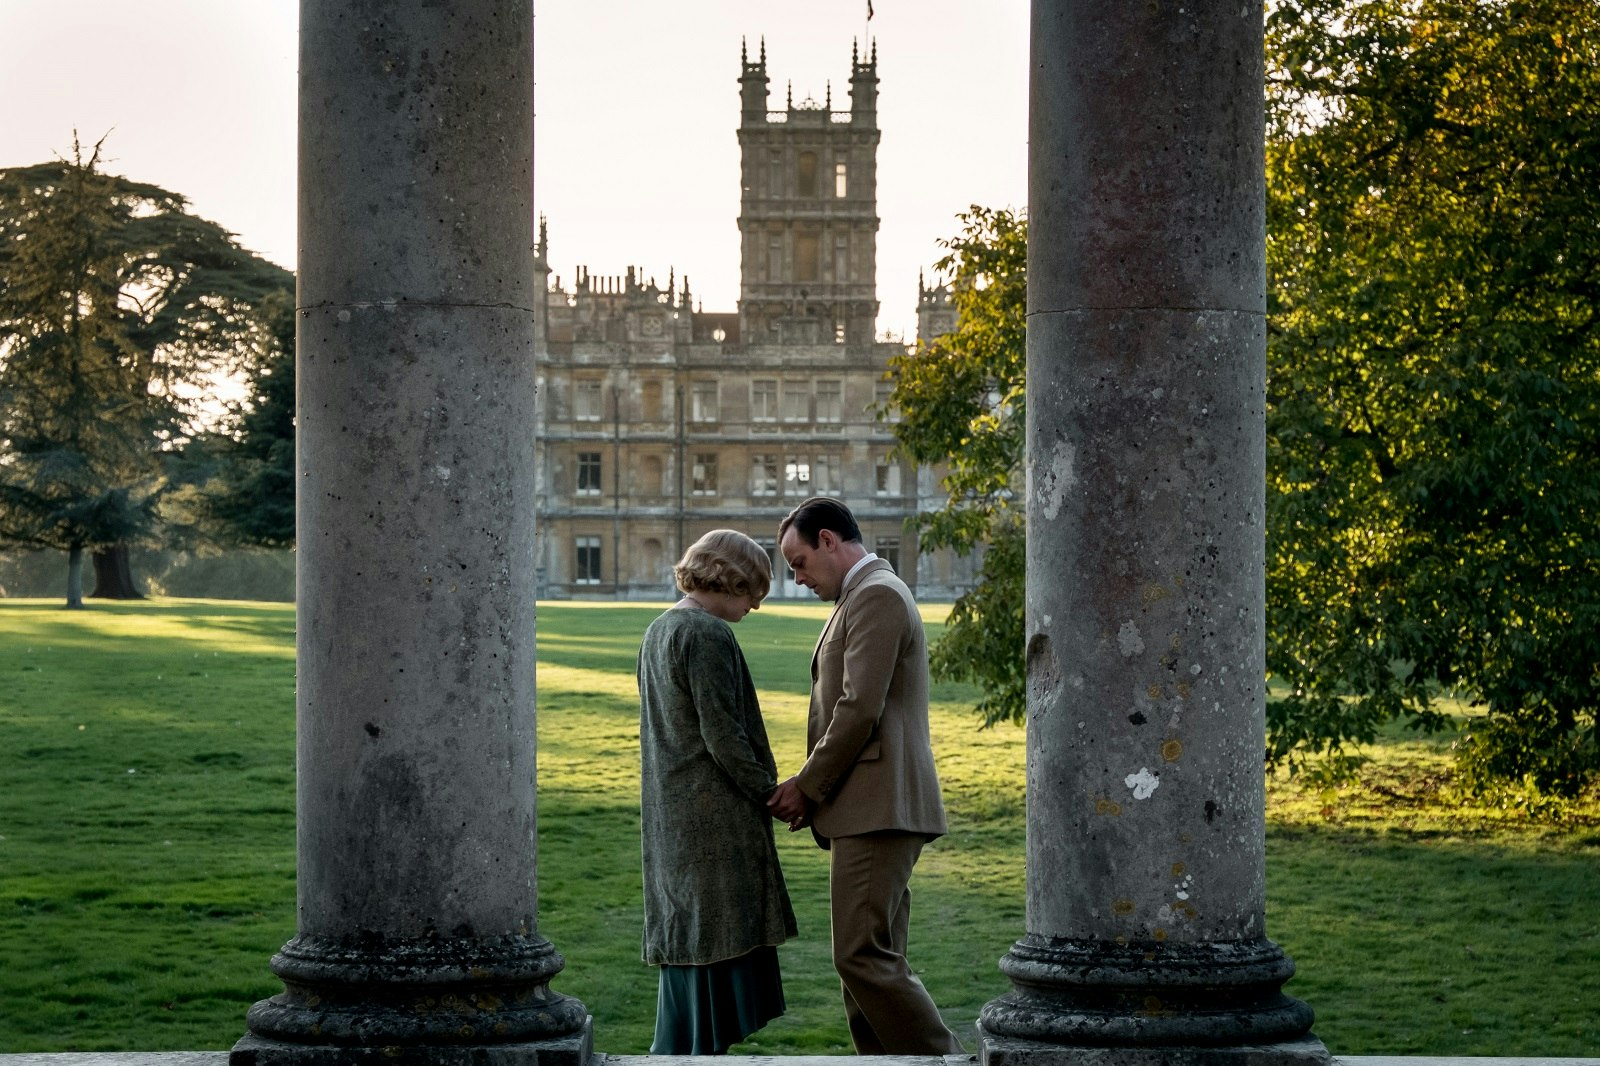 A man and a woman stand holding hands with their heads hanging low. Highclere Castle, doubling as Downton Abbey, can be seen in the background.